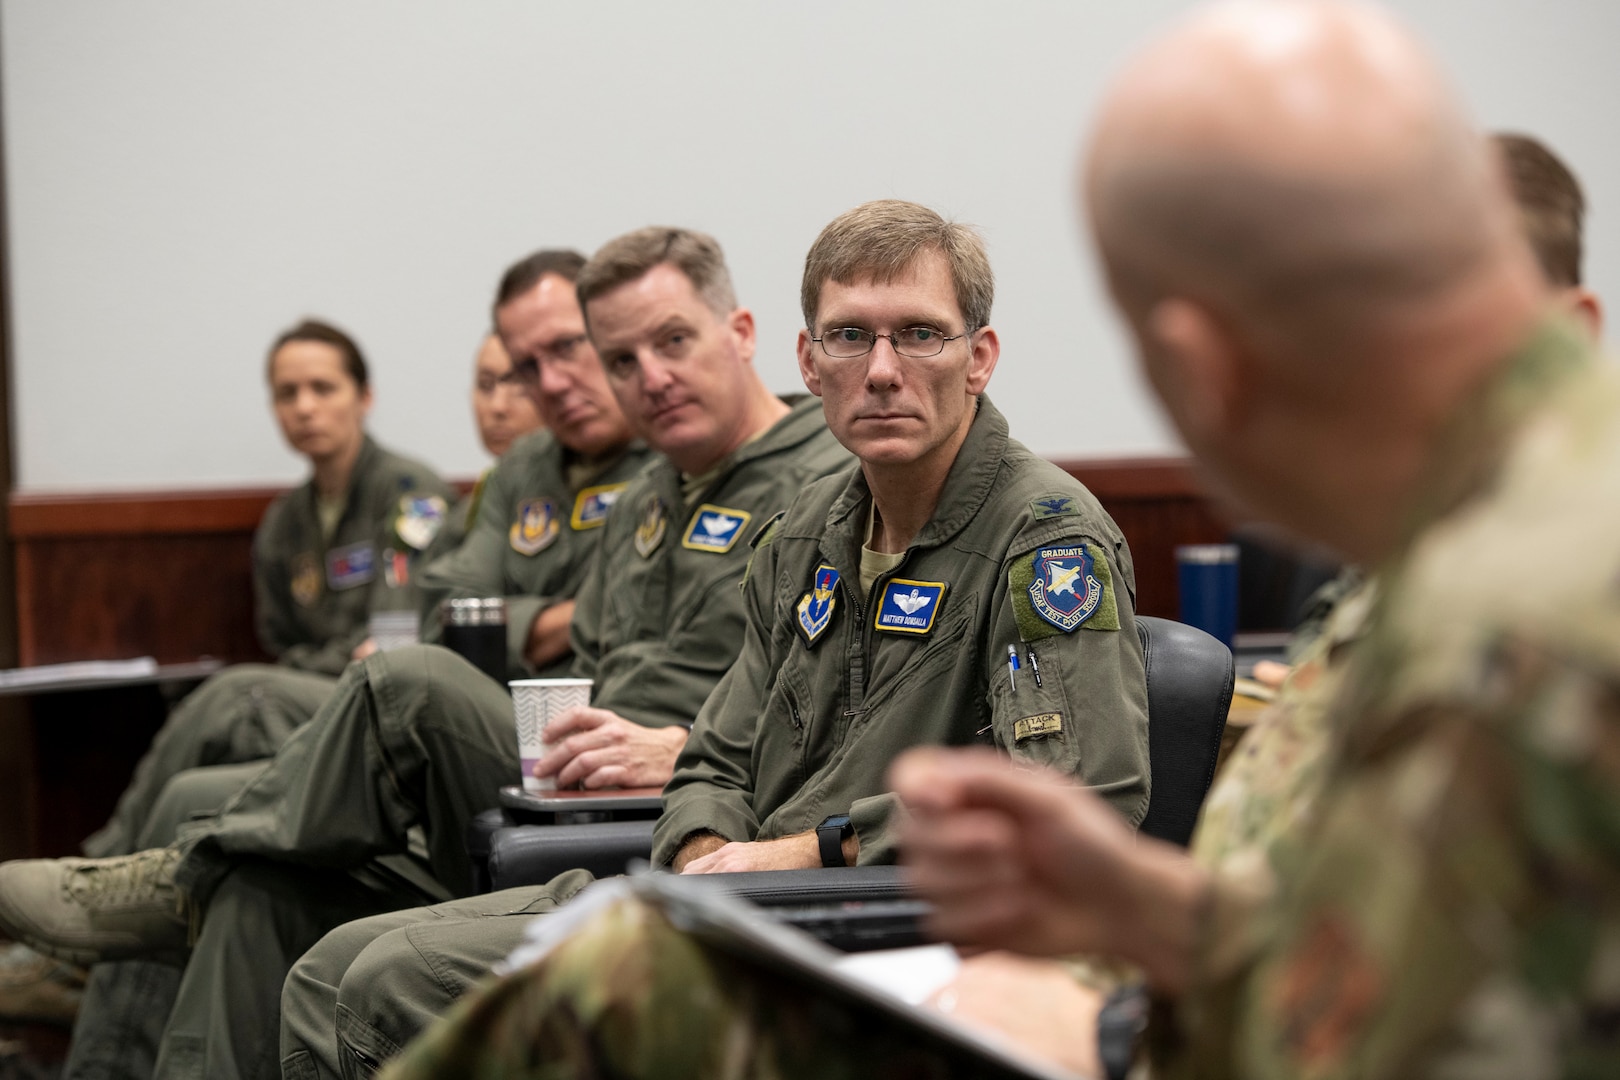 Col. Matthew Domsalla,12th Flying Training Wing vice commander, listens during a Total Force Integration briefing Feb. 4 at Joint Base San Antonio-Randolph, Texas. TFI works to improve integration between active-duty Air Force, Air Force Reserve, and the Air National Guard.(U.S. Air Force photo by Sabrina Fine)